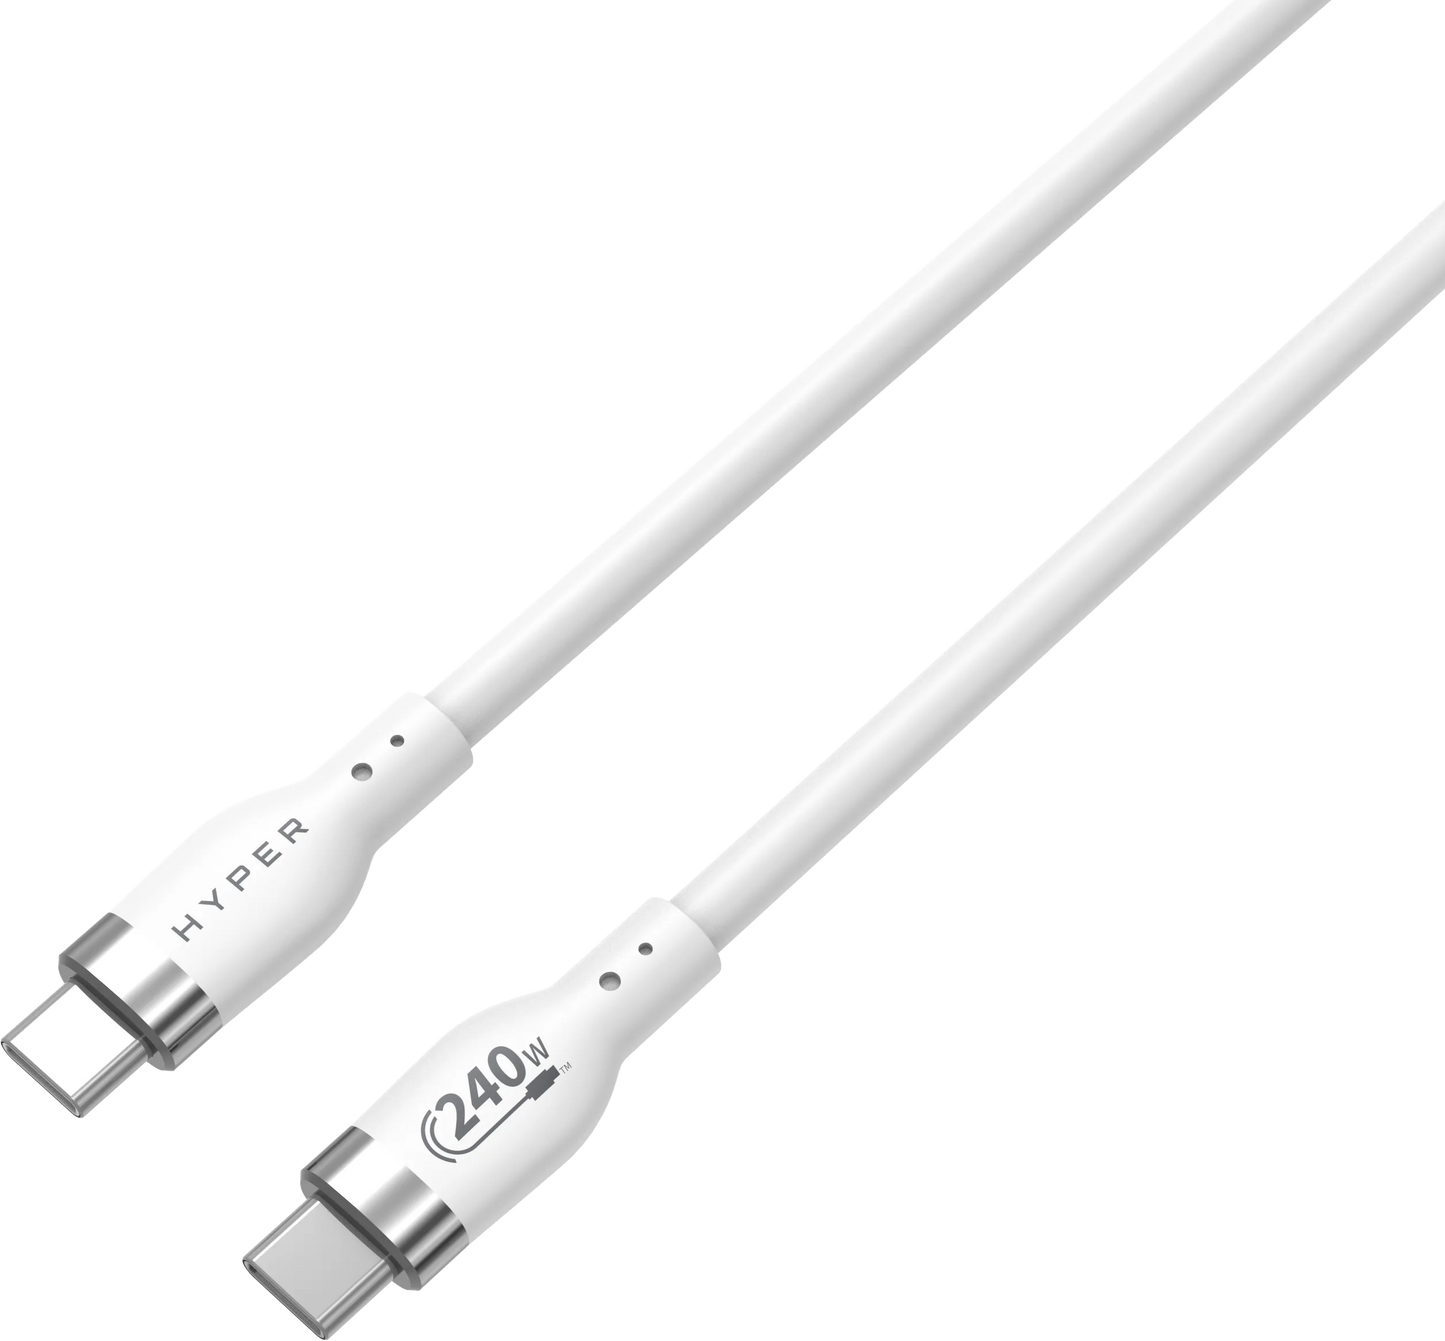 Targus HJ4001WHGL HyperJuice 240W Silicone USB-C to USB-C Cable (3ft/1m), White, 6941921149529